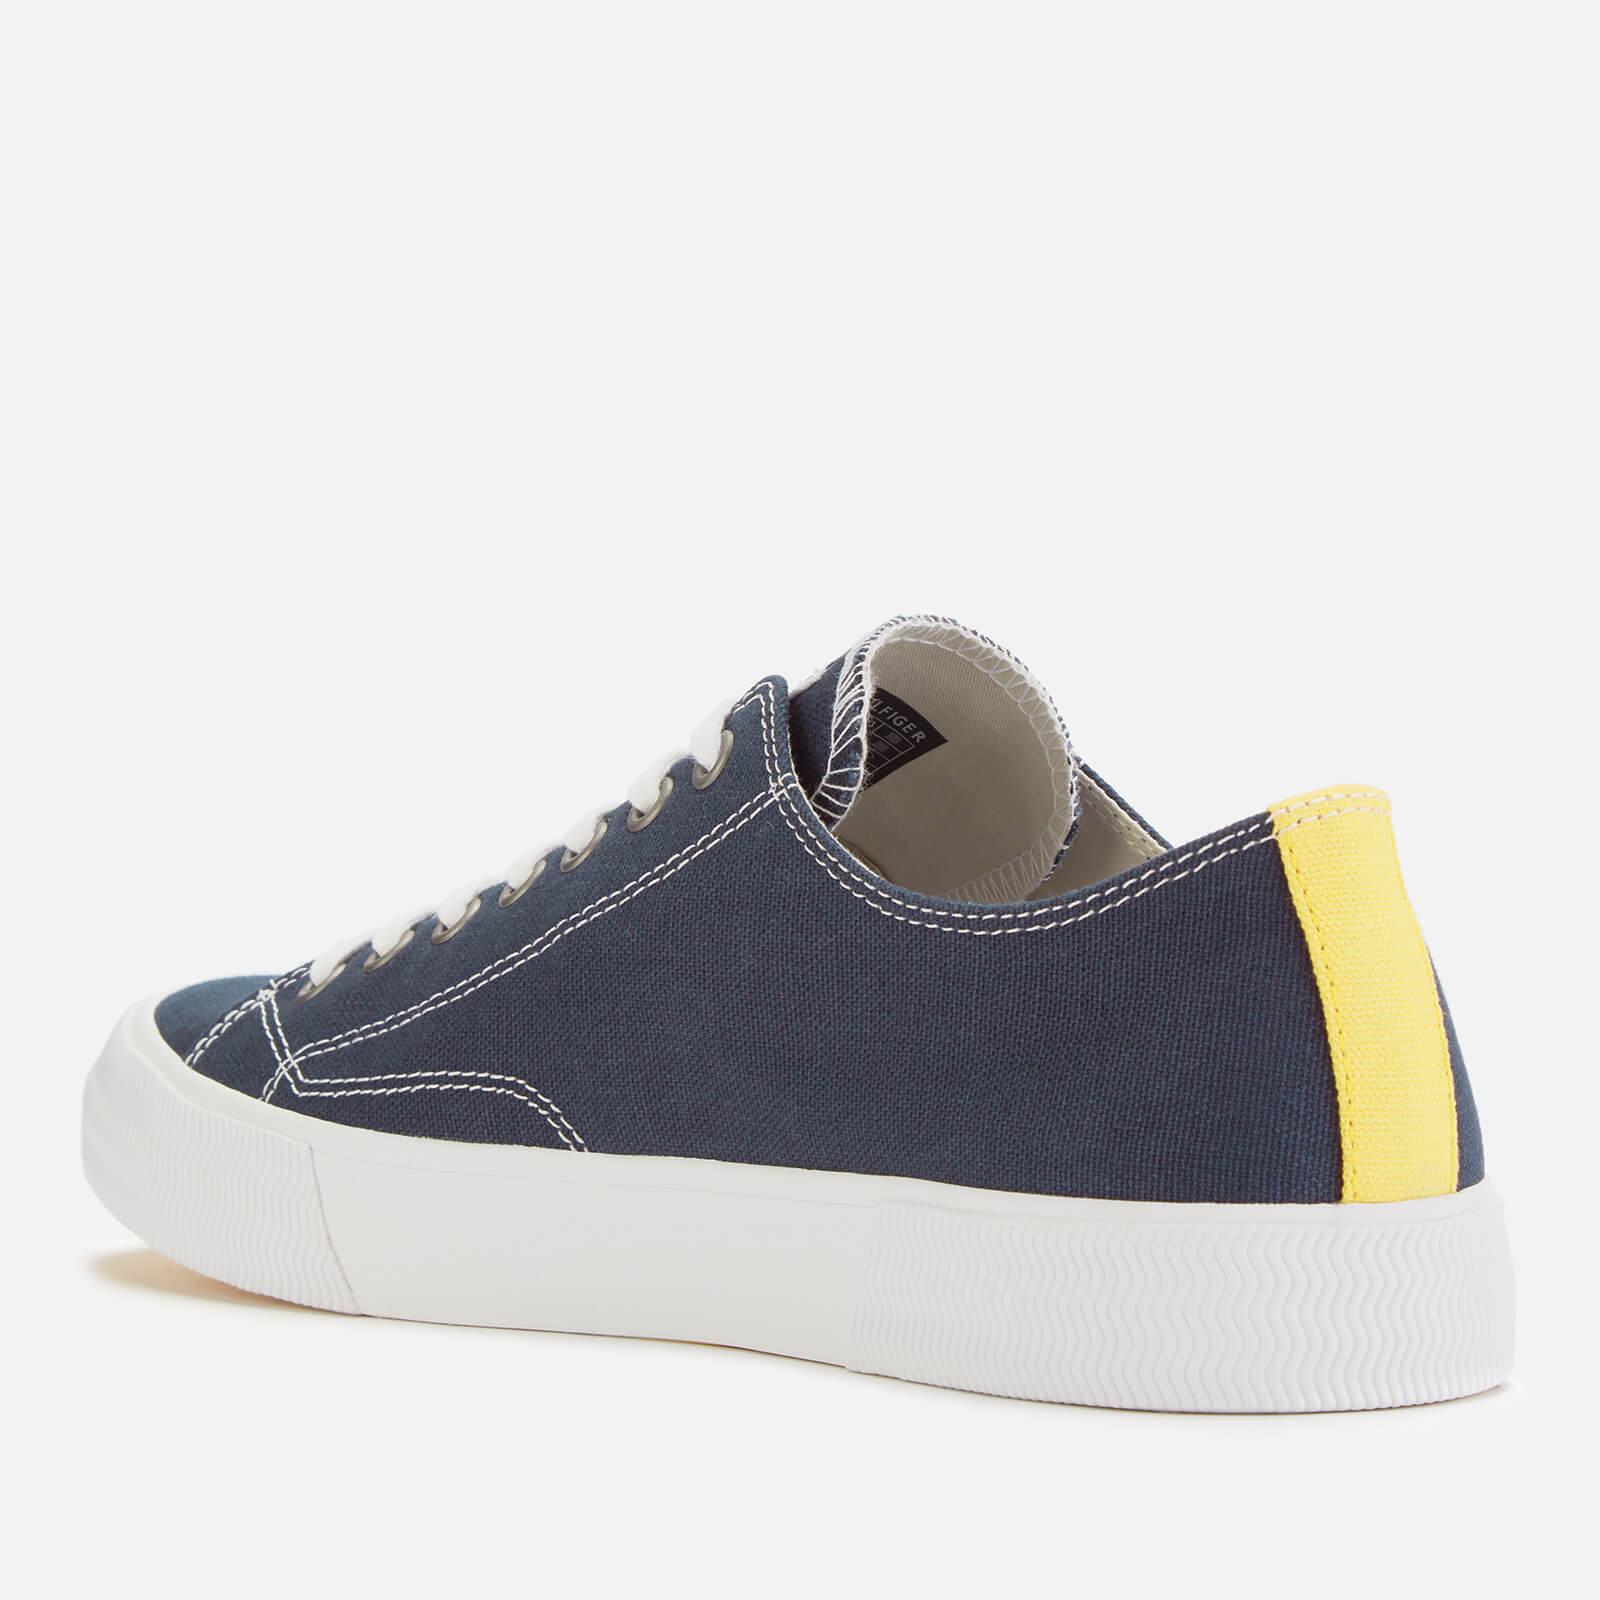 Tommy Hilfiger Classic Canvas Trainers in Blue for Men - Lyst